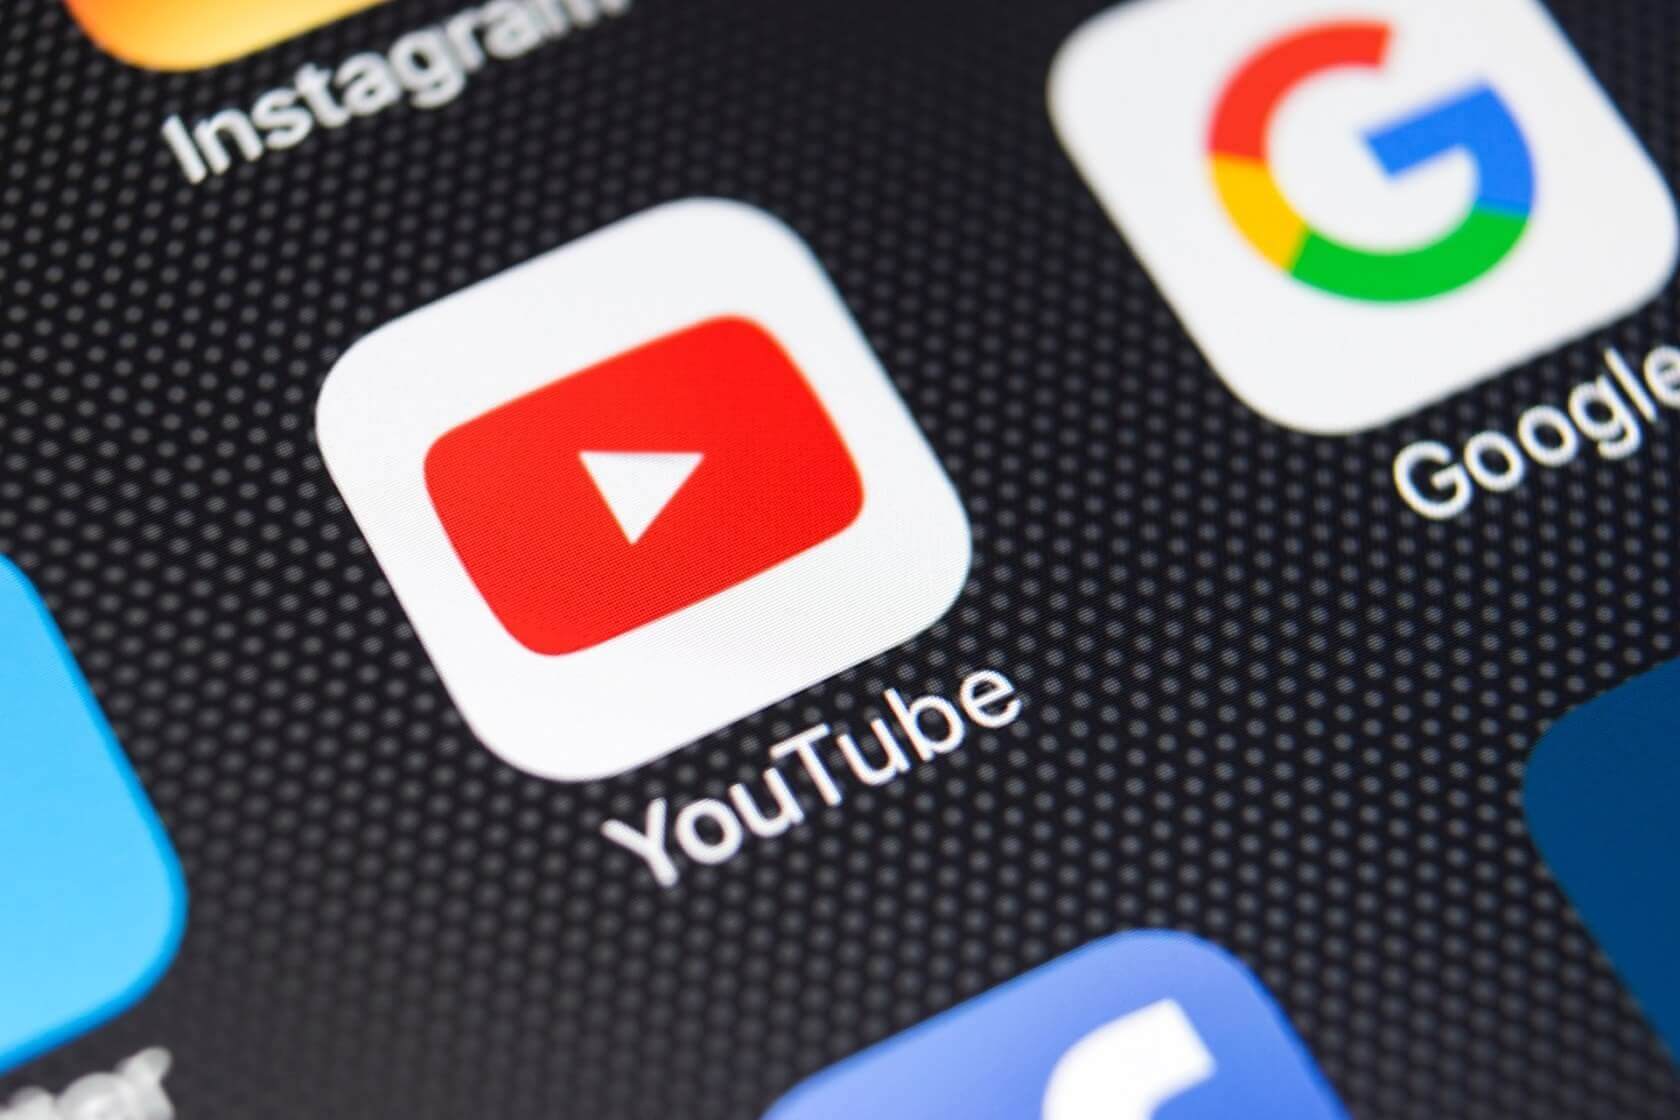 Copyright holders can no longer manually take YouTube creator revenue for brief music clips